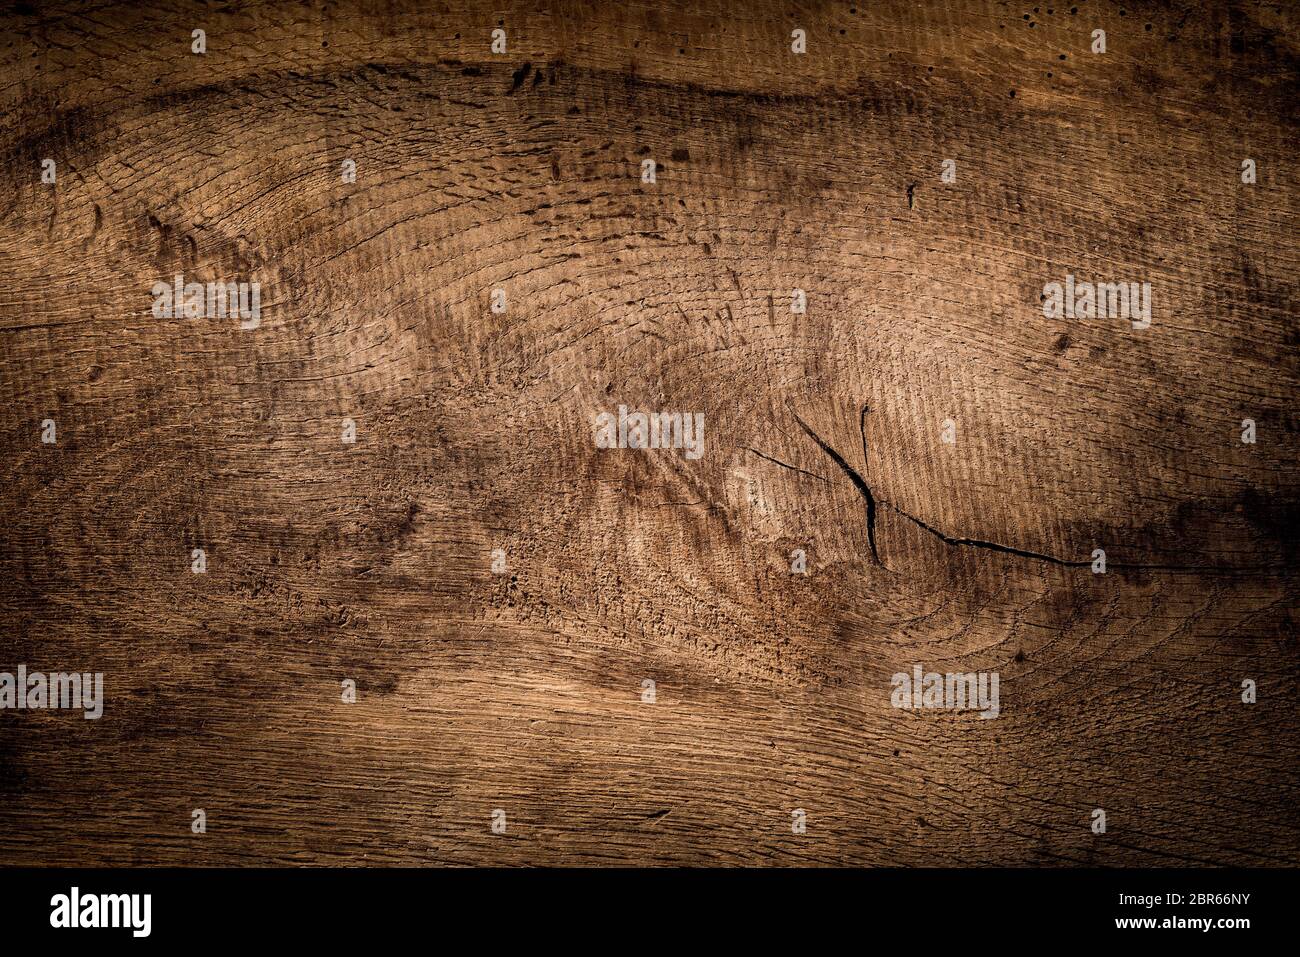 Rustic wood background, wood texture Stock Photo